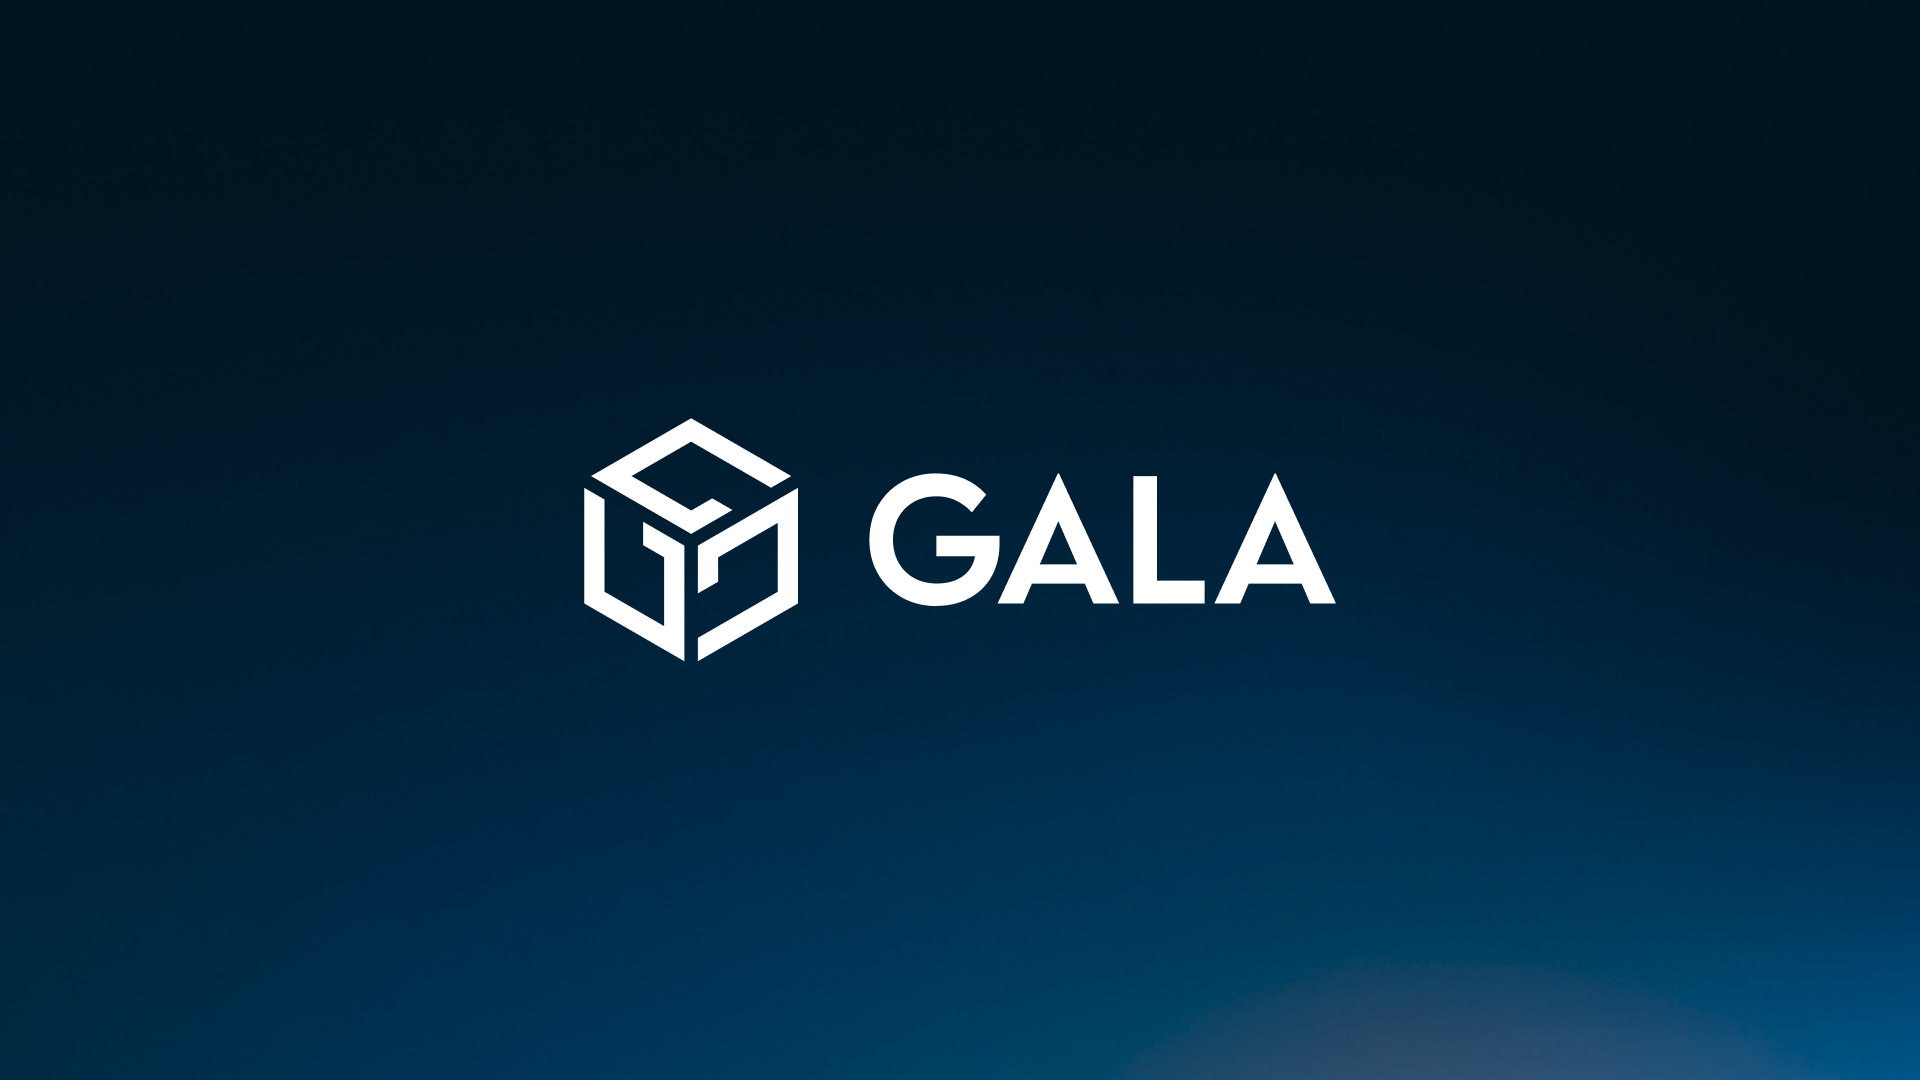 The vast Gala web3 ecosystem is built for entertainment but ready for anything. Unlock a universe of ownership, empowerment and rewards with a free Gala account.